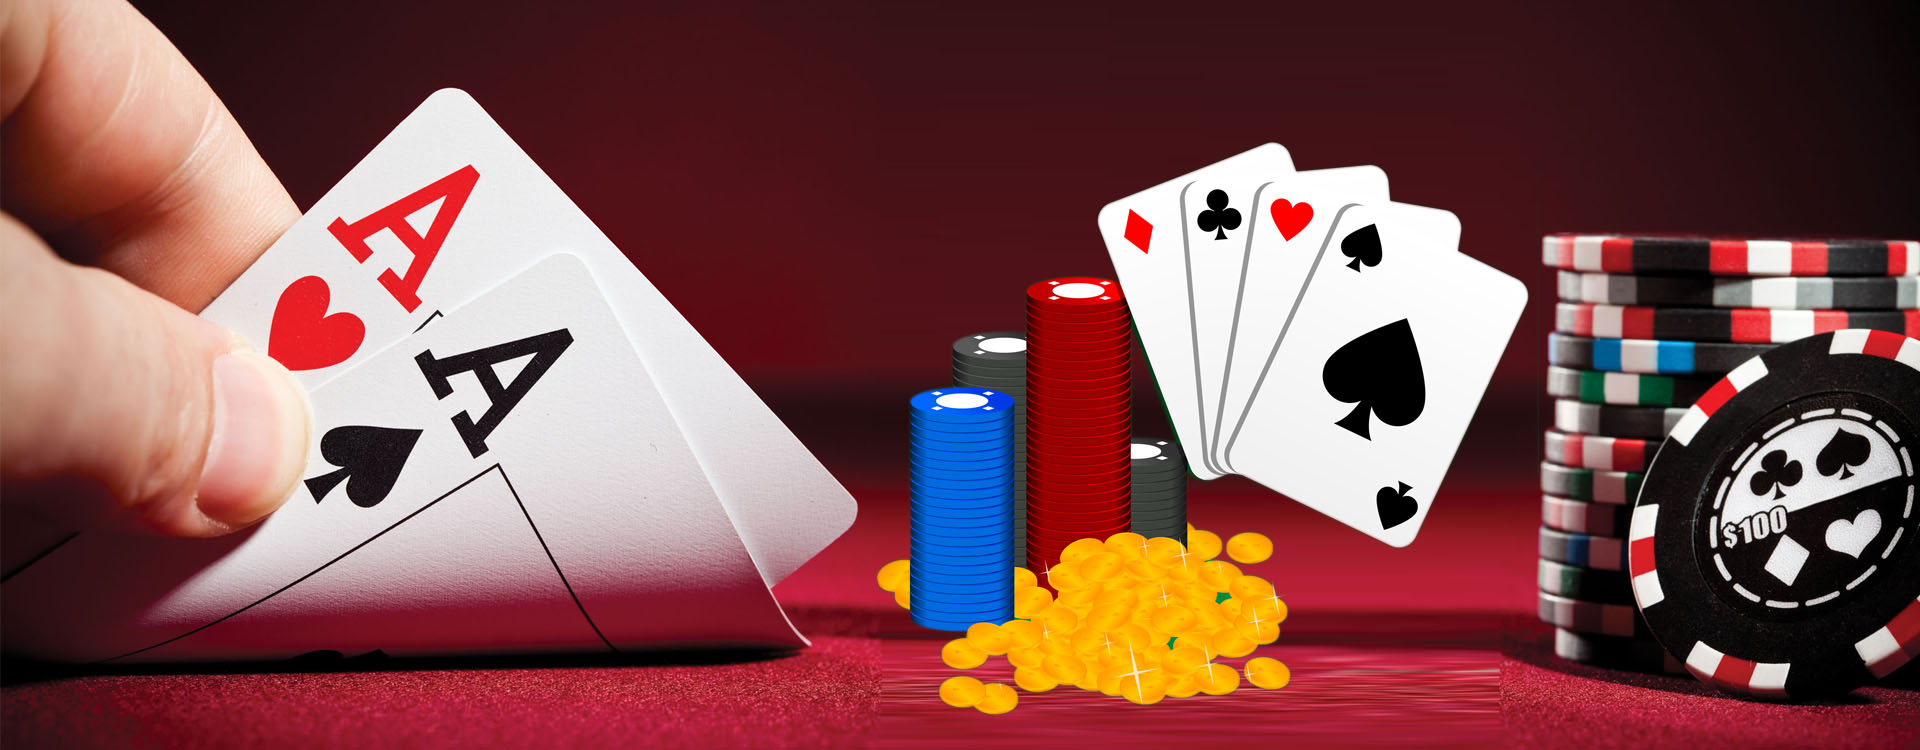 Spy Cheating Playing Cards Shop in Shadi Pur,Delhi India Buy Online KK Cards Delhi at Low Price Gambling Cards Devices & Gadgets, Poker Game, Secret Soft Contact Lenses for Invisible Marked Cards from Cheating Playing Cards Shop in Shadi Pur, Delhi India